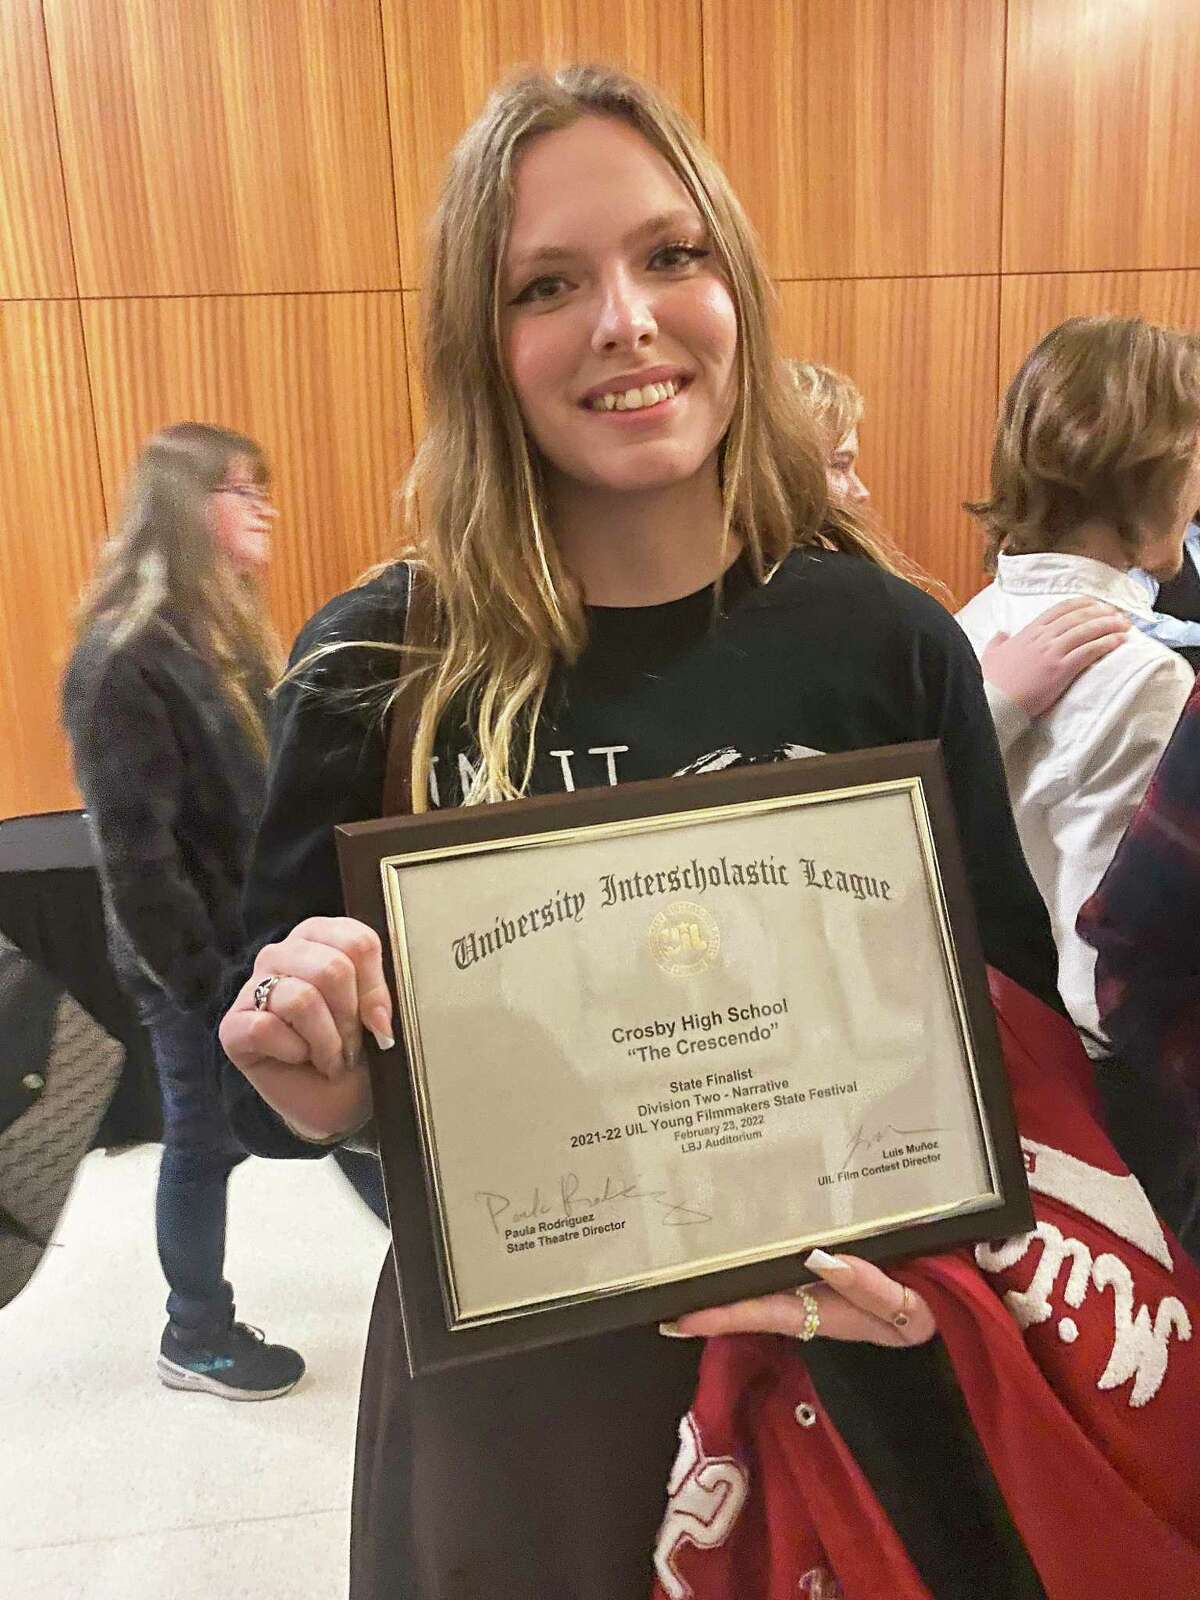 Crosby senior Katelynn Mitcham holds the plaque awarded to the students for their fourth-place finish at the 2021-22 UIL Young Filmmakers State Festival. It was the first time the program had achieved that level of success.